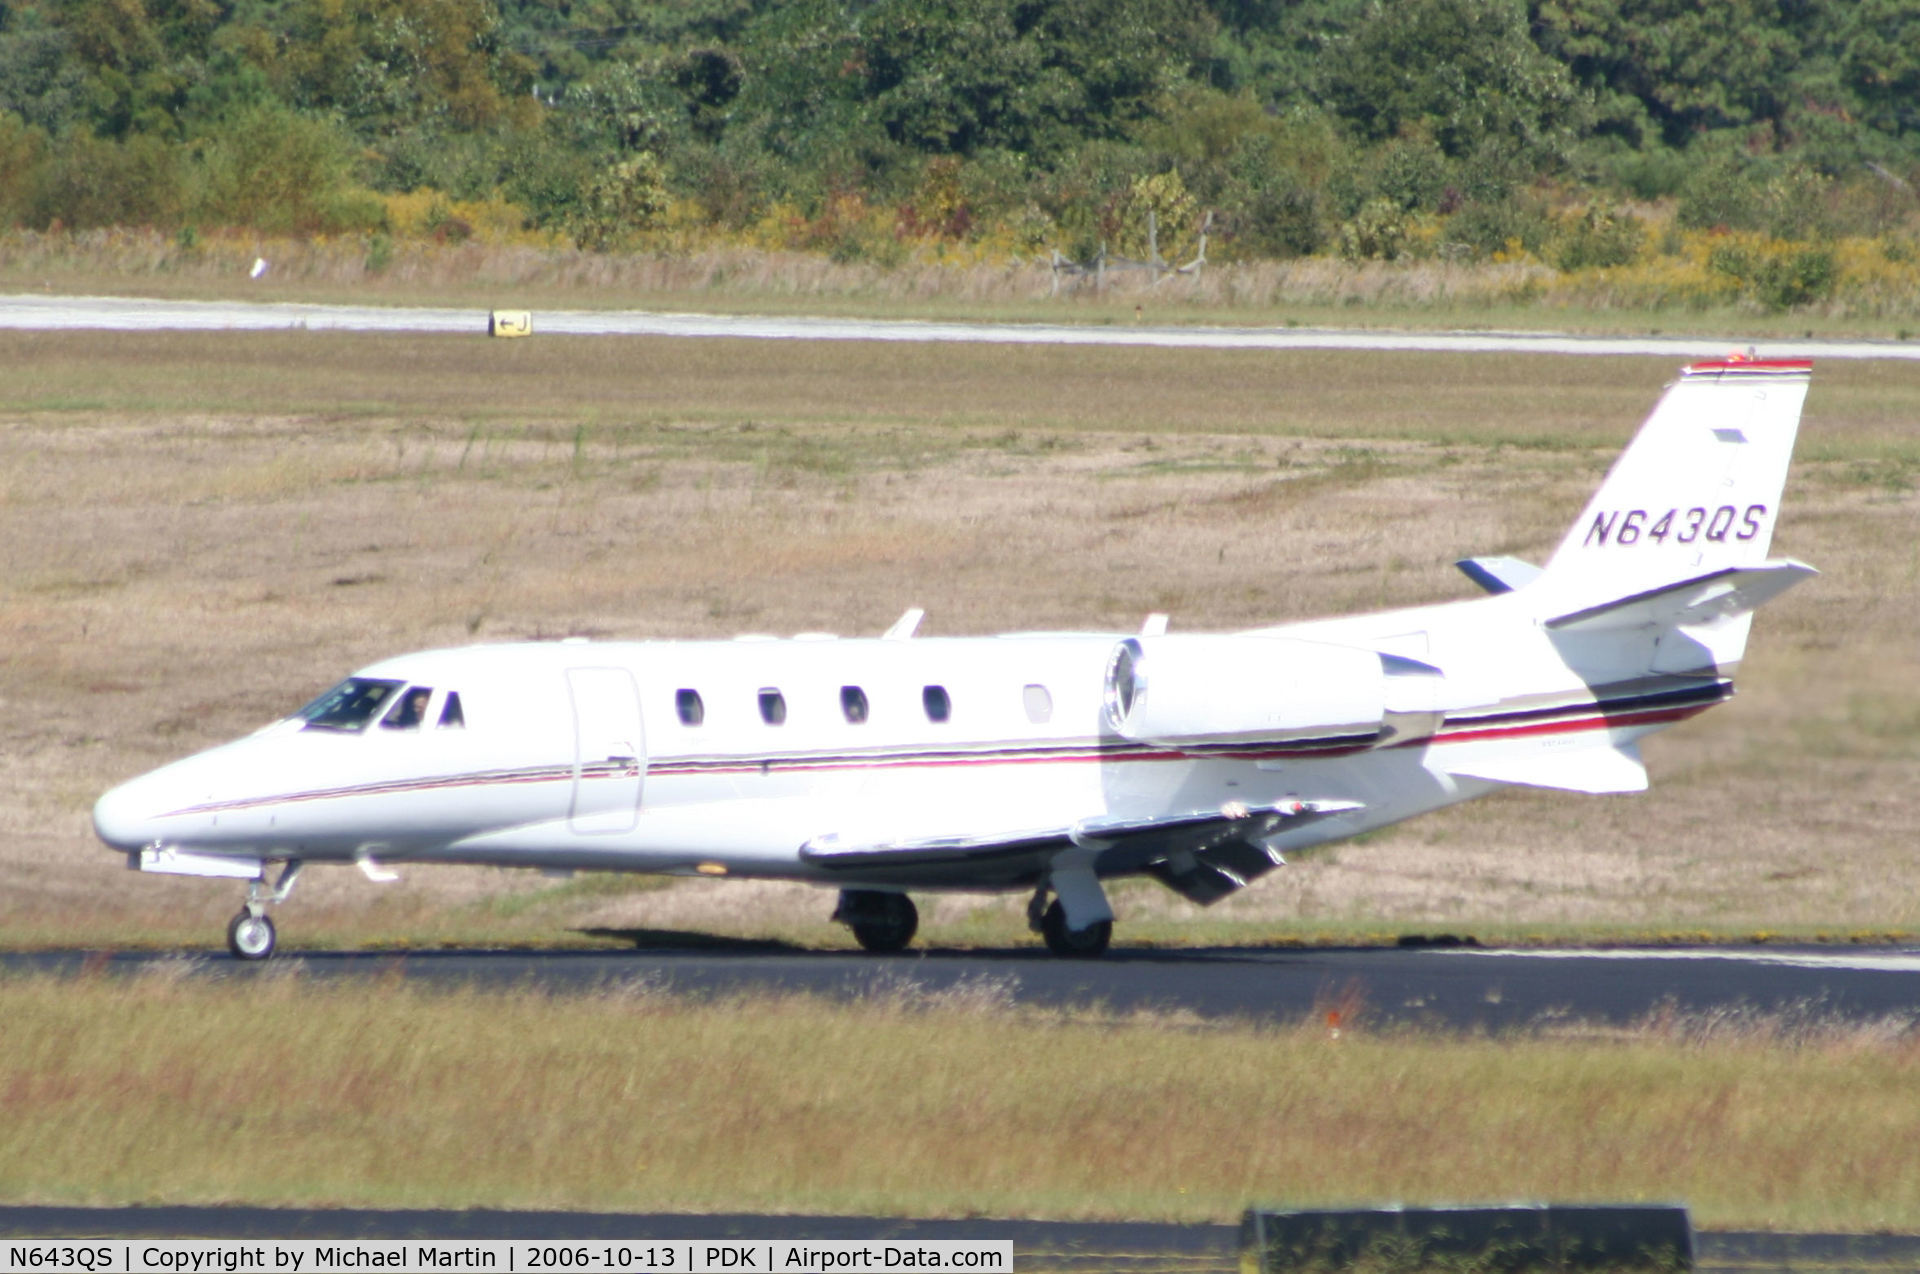 N643QS, 2005 Cessna 560XL C/N 560-5588, Taxing to Signature Flight Services